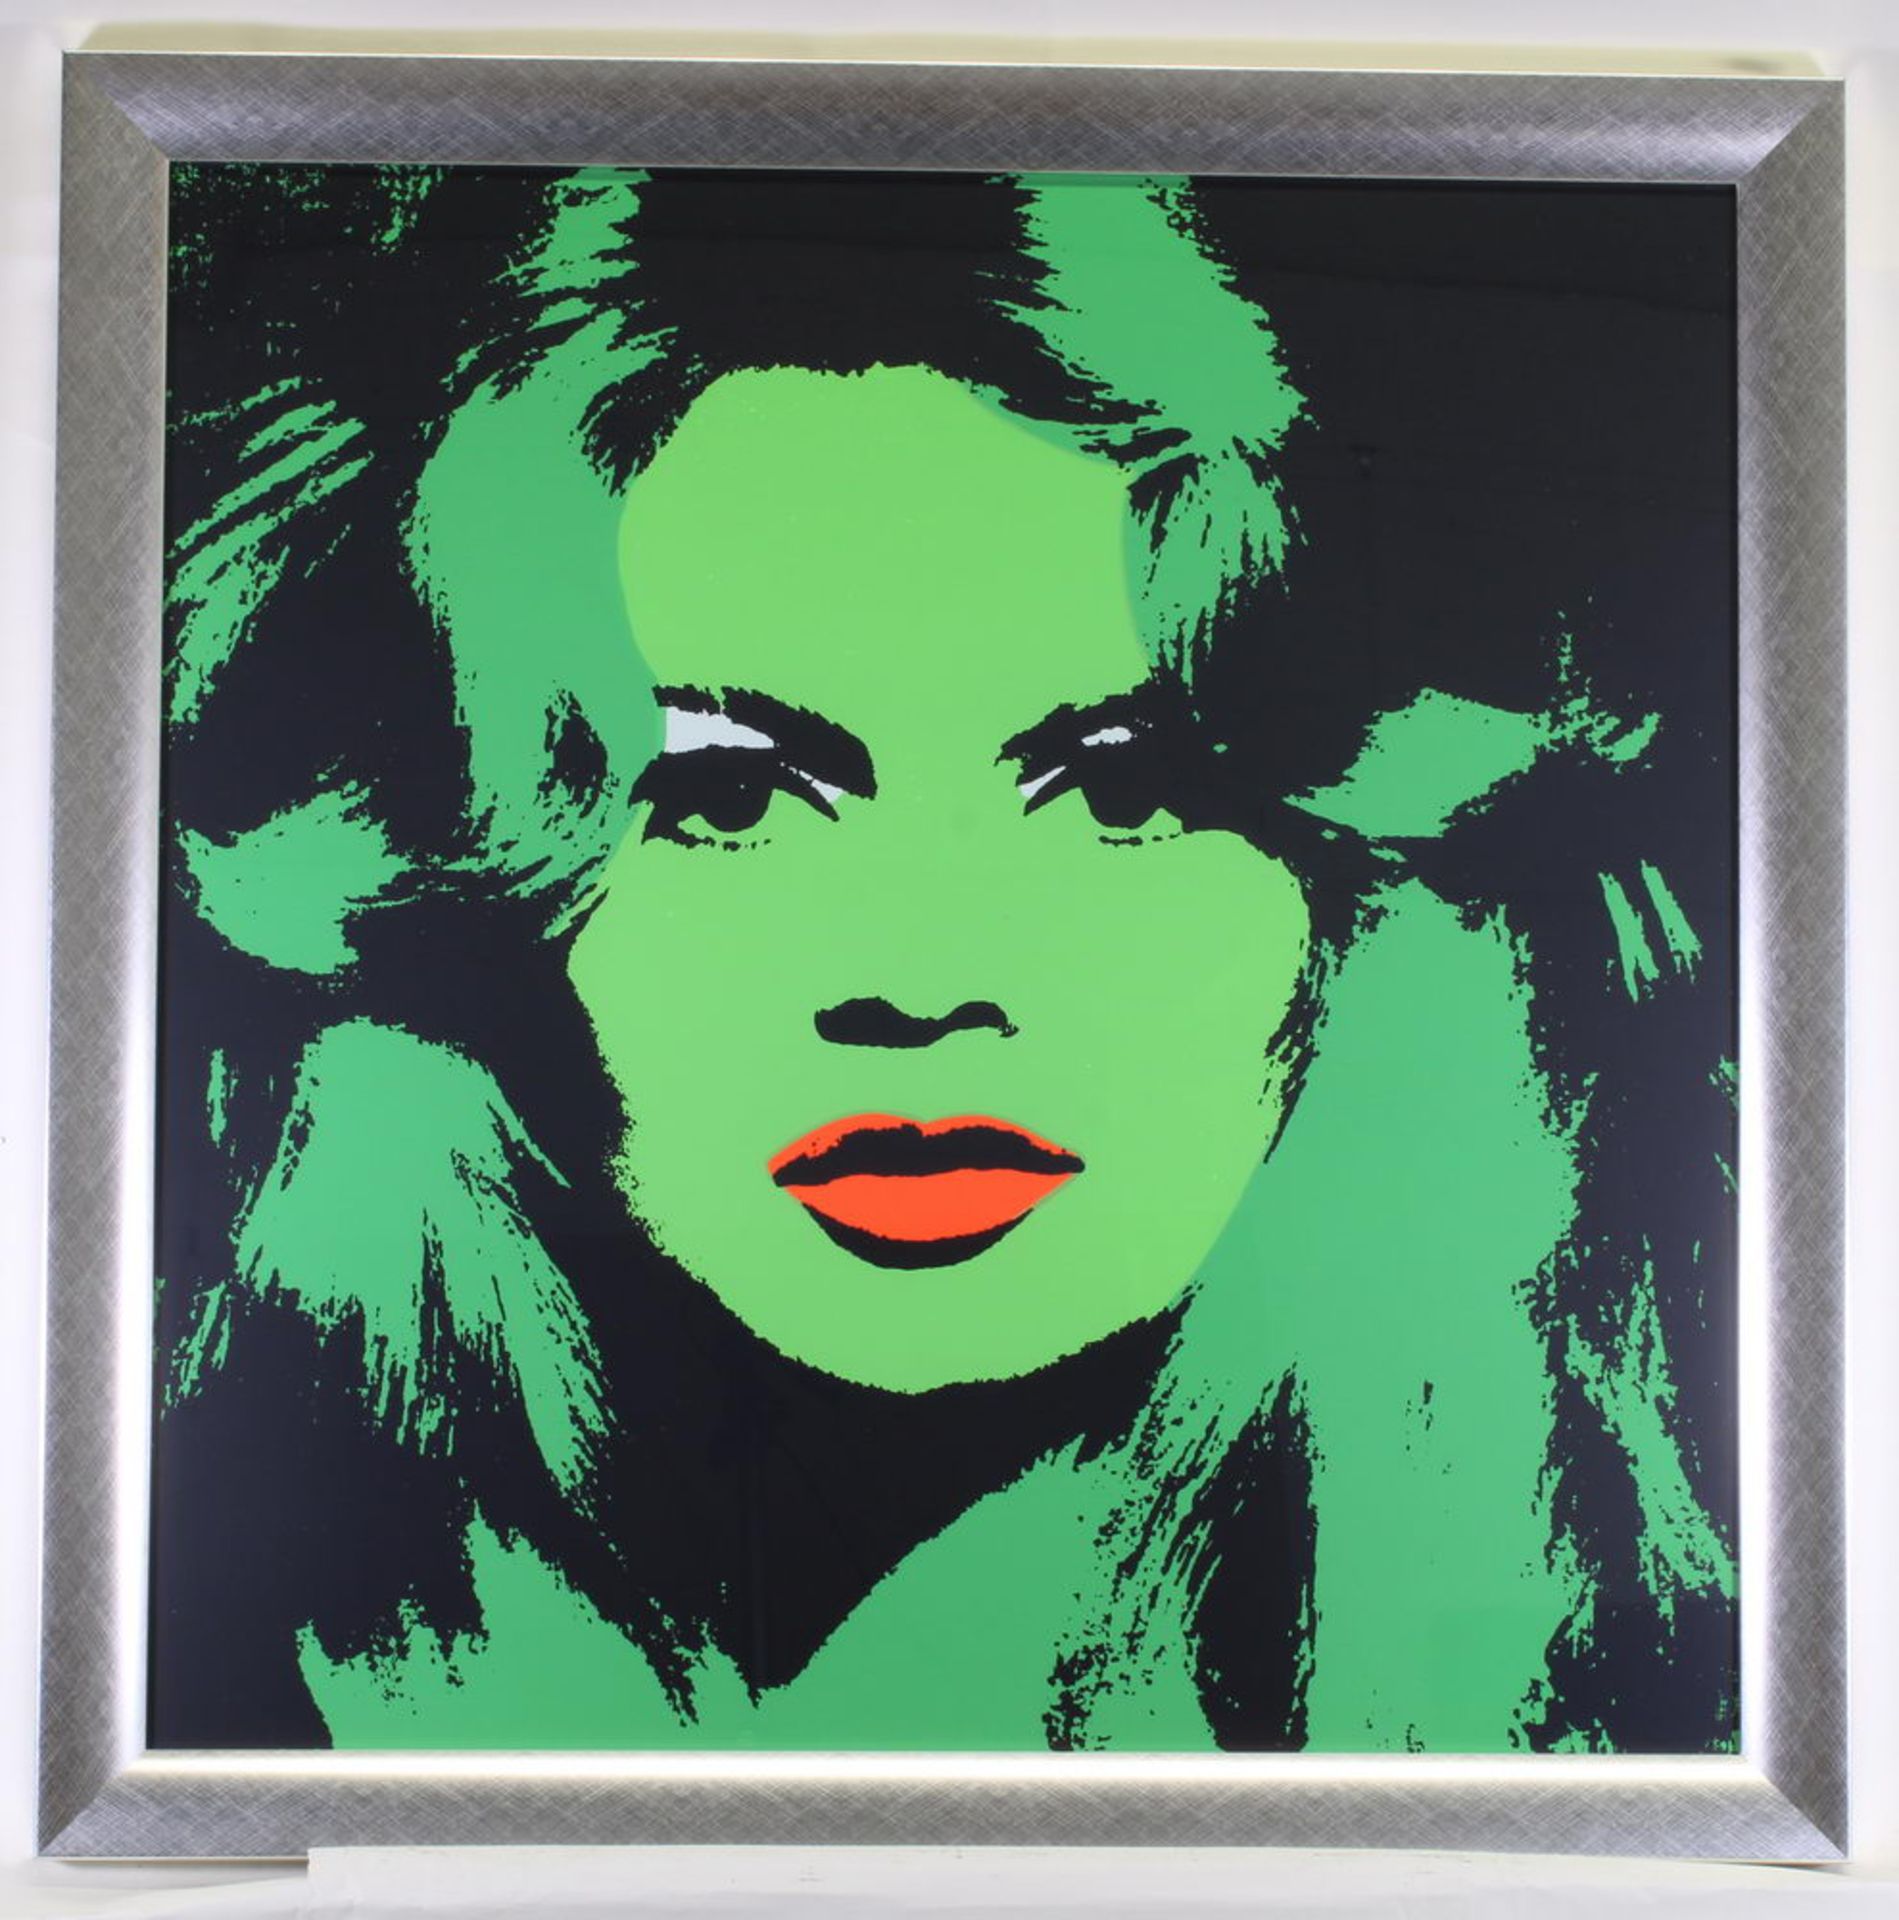 Warhol, Andy (1928 Pittsburgh - 1987 New York), "Brigitte Bardot", Farbserigrafie, published by Sun - Image 2 of 2